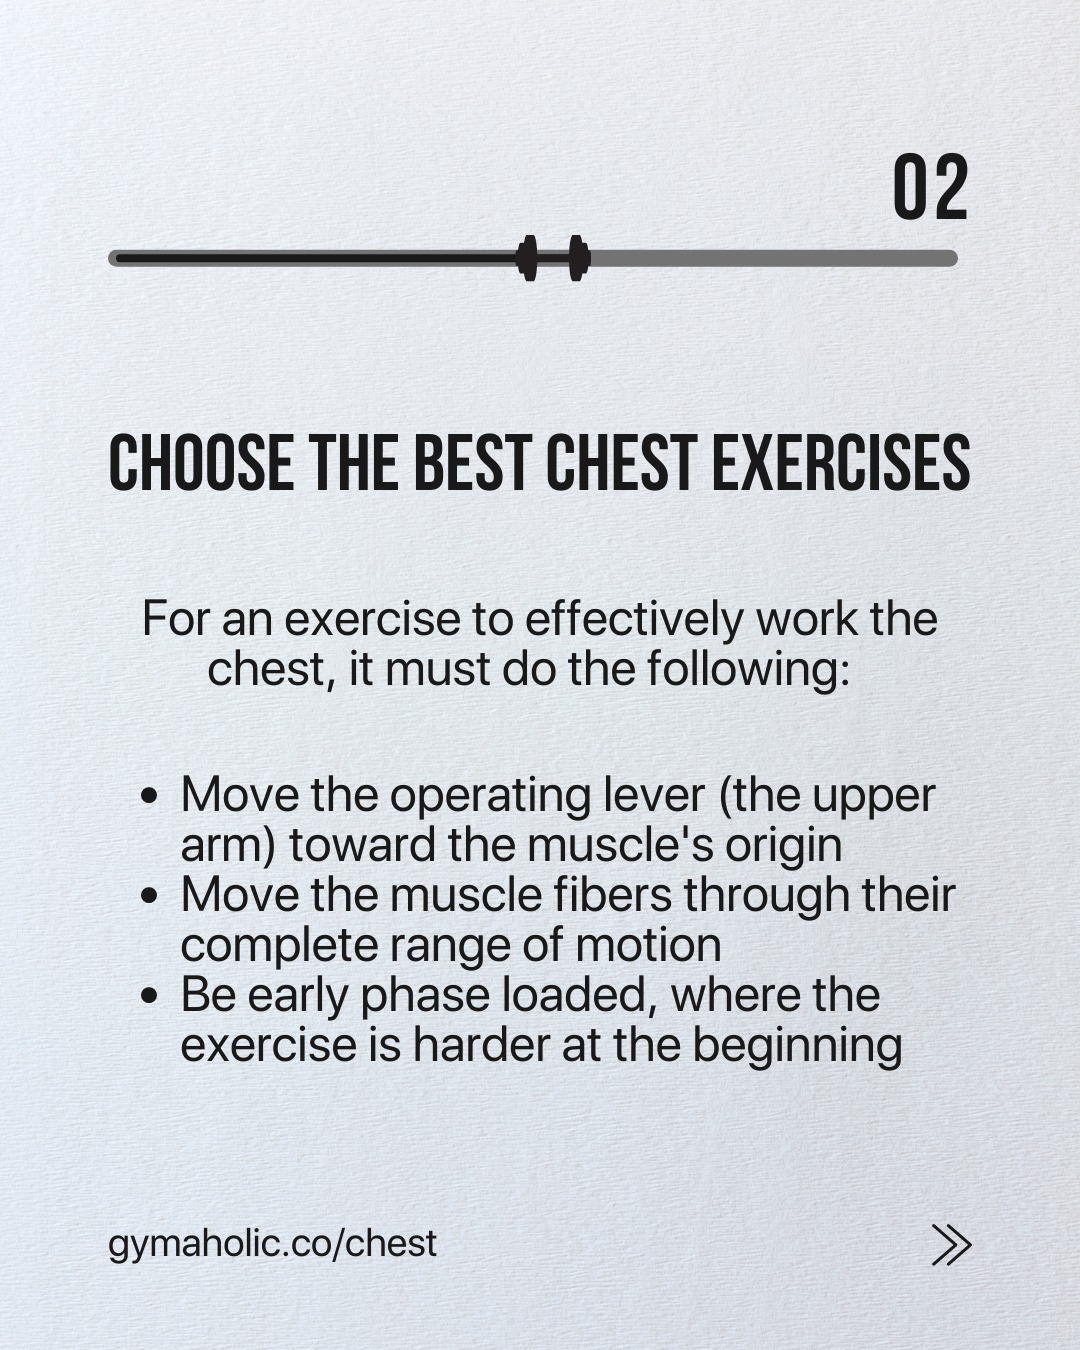 If you’re happy with your conventional chest training gives you, it’s okay to